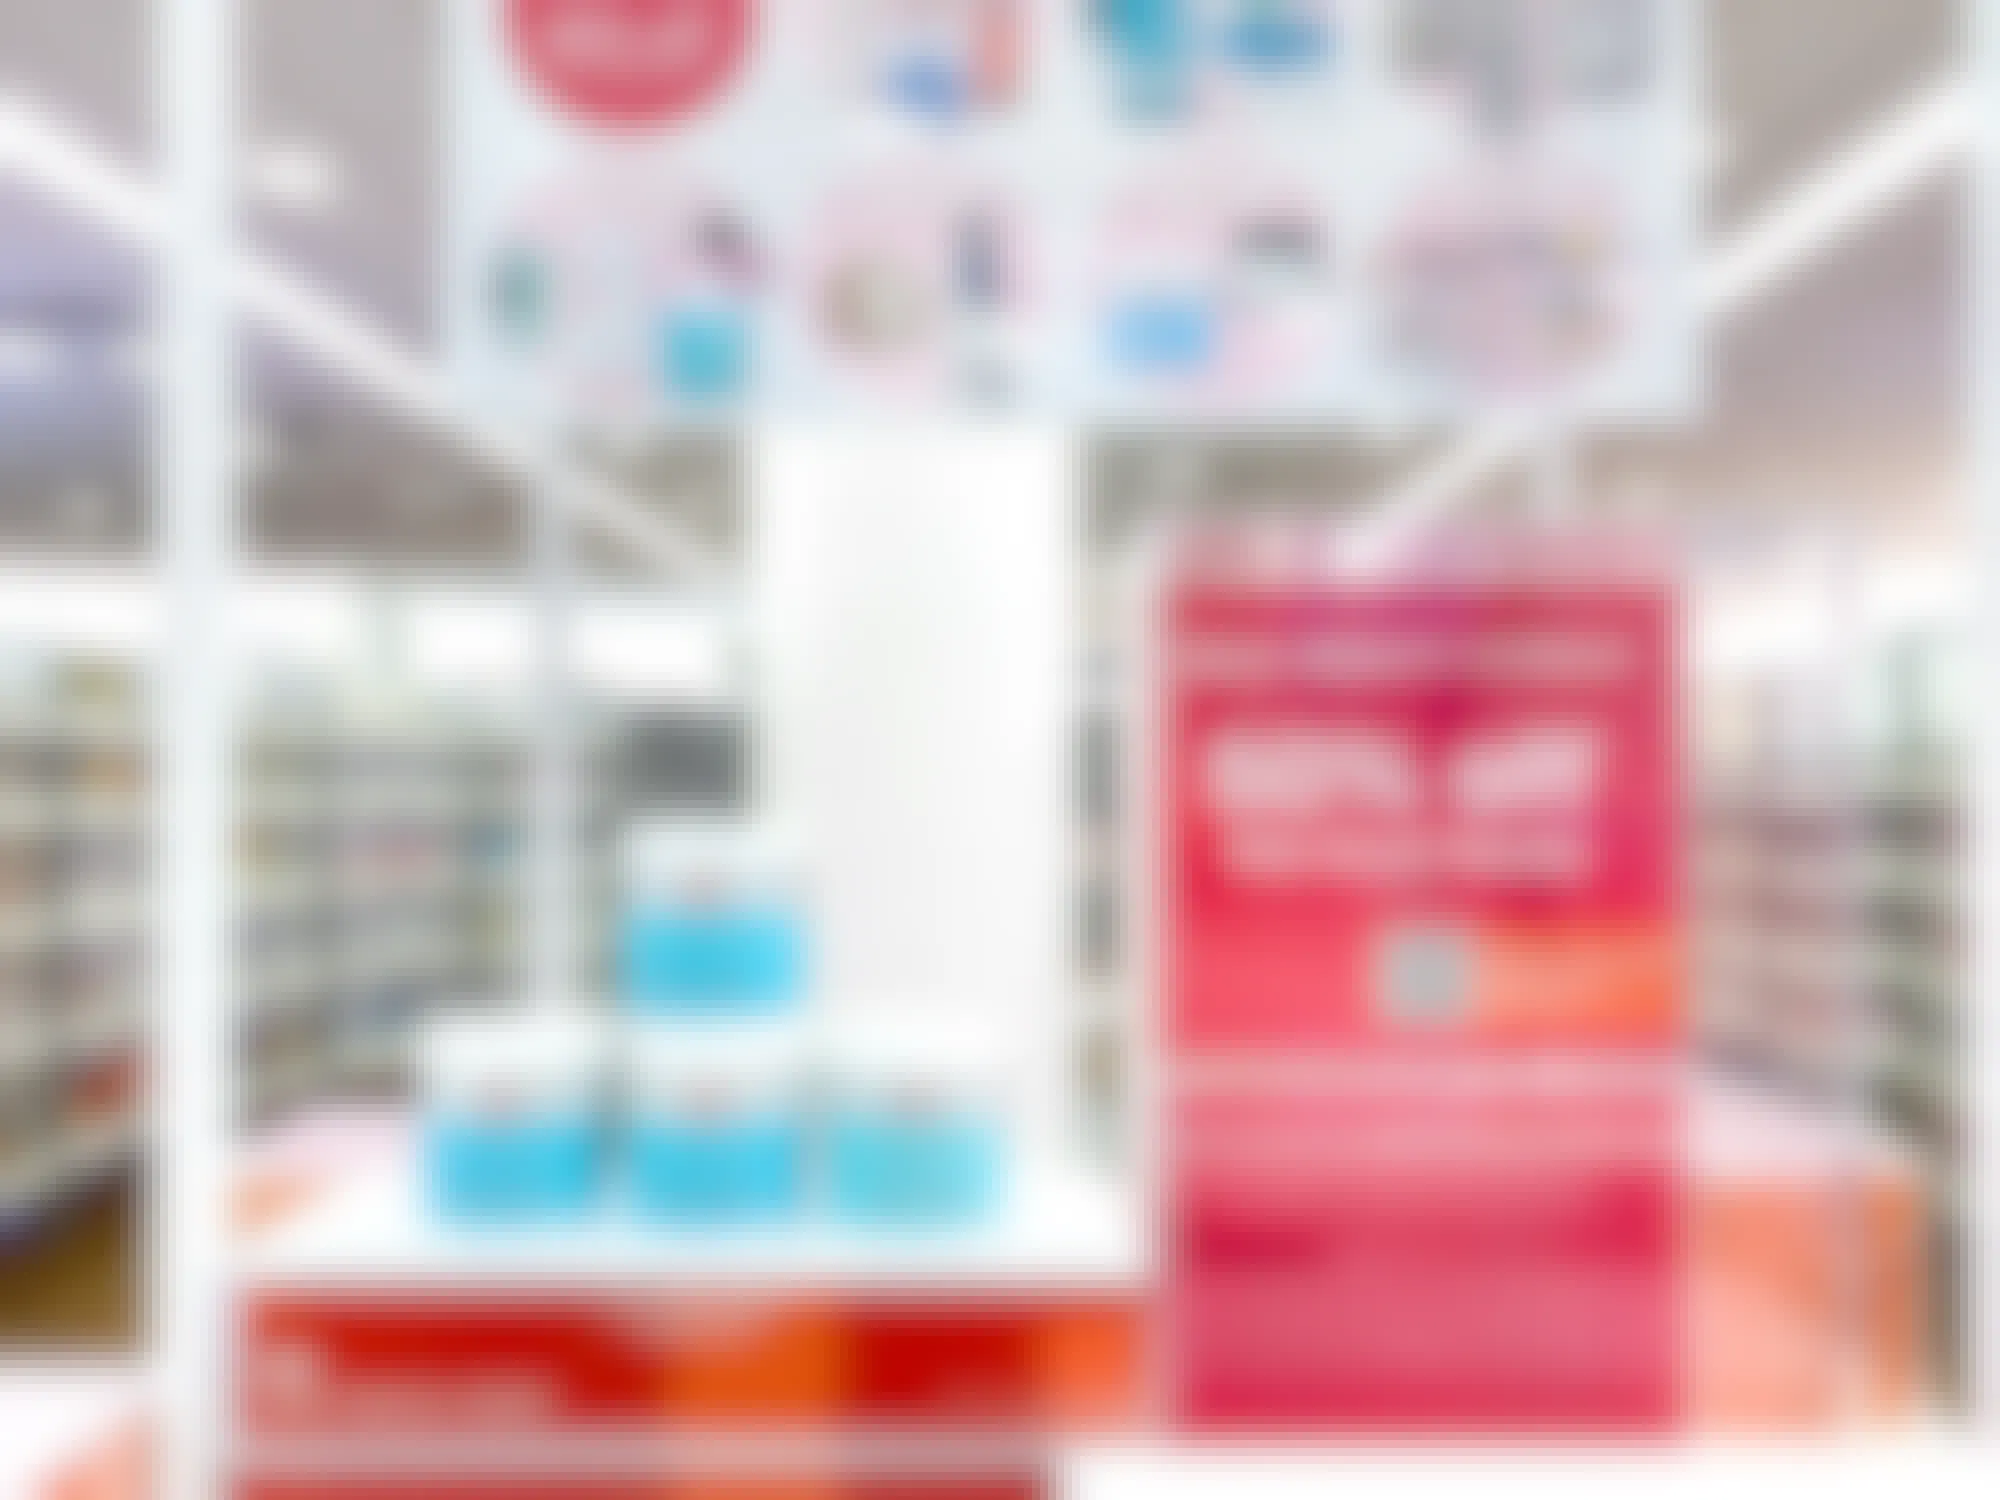 ulta love your skin event signage and dates with first aid beauty promo